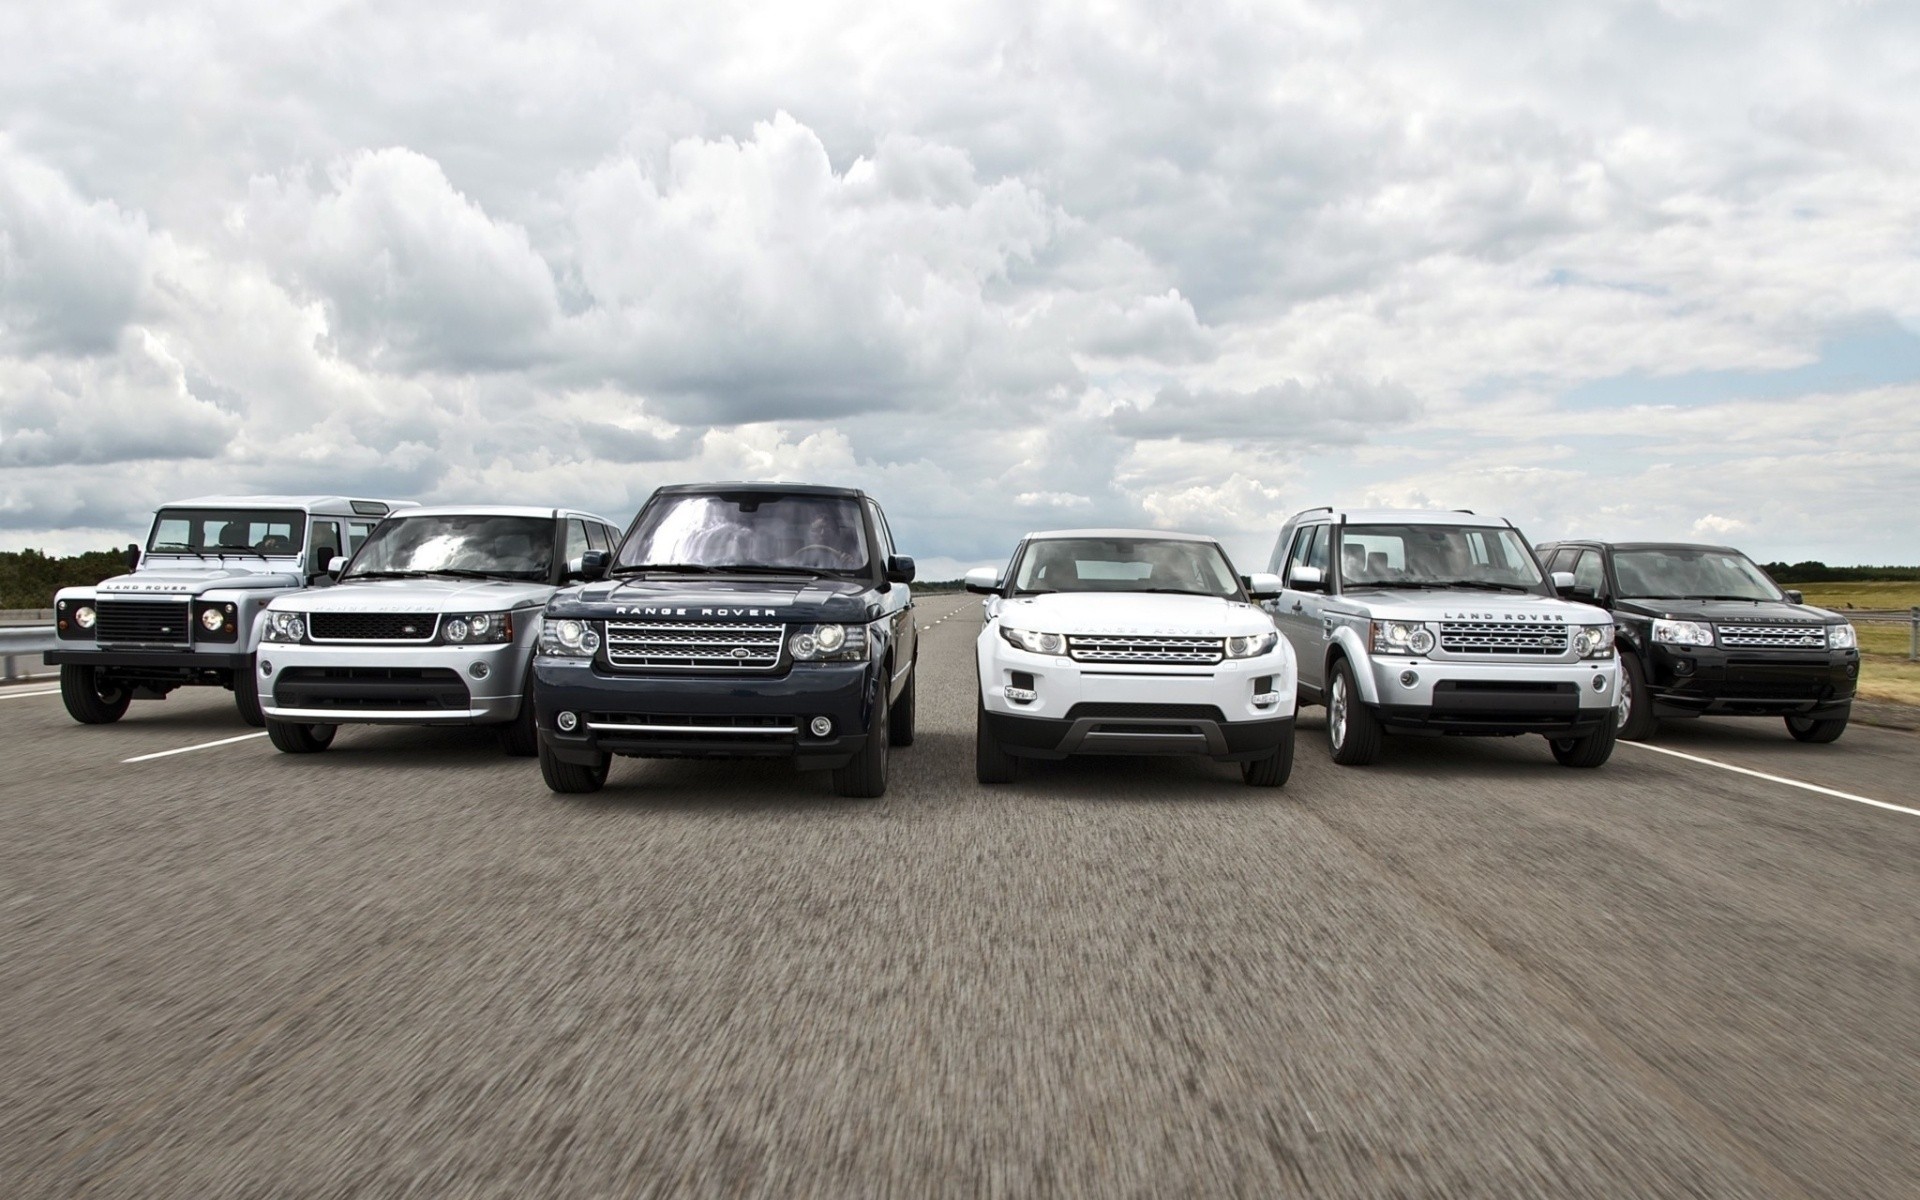 cars, Land, Rover, Suv, Front, View, Range, Rover, Evoque, Land, Rover, Range, Rover, Vogue Wallpaper